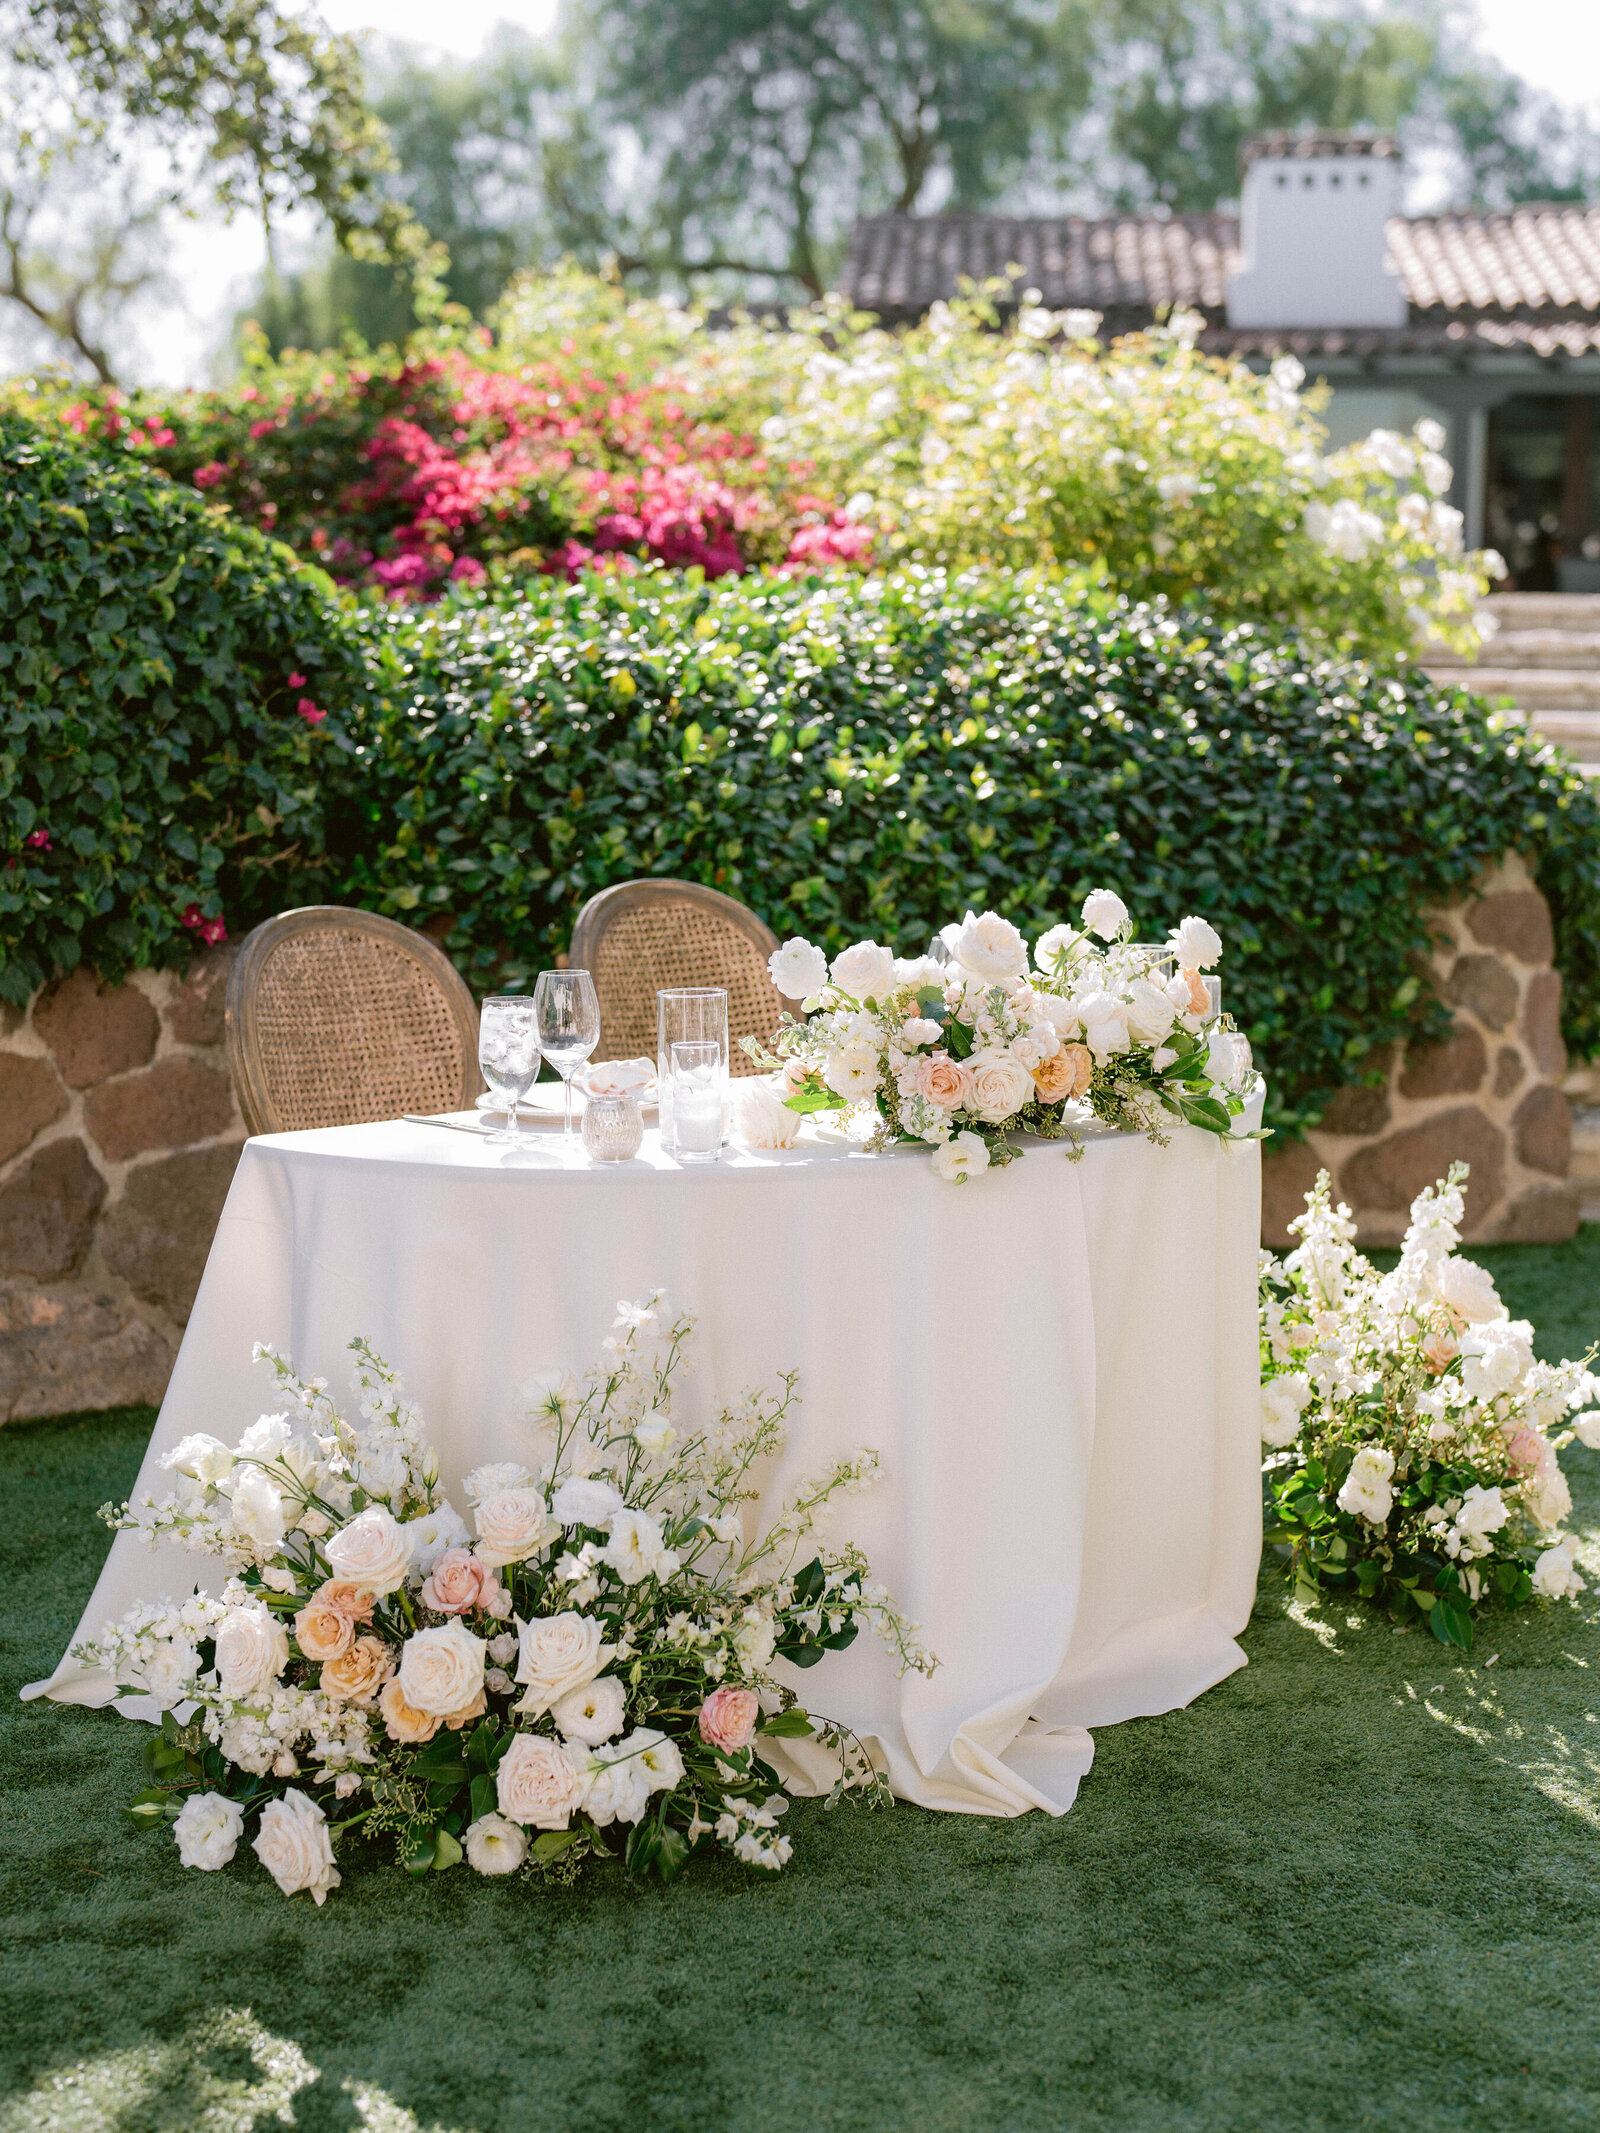 This wedding dinner table showcases large uniquely designed flower bouquets to help the newly weds stand out.